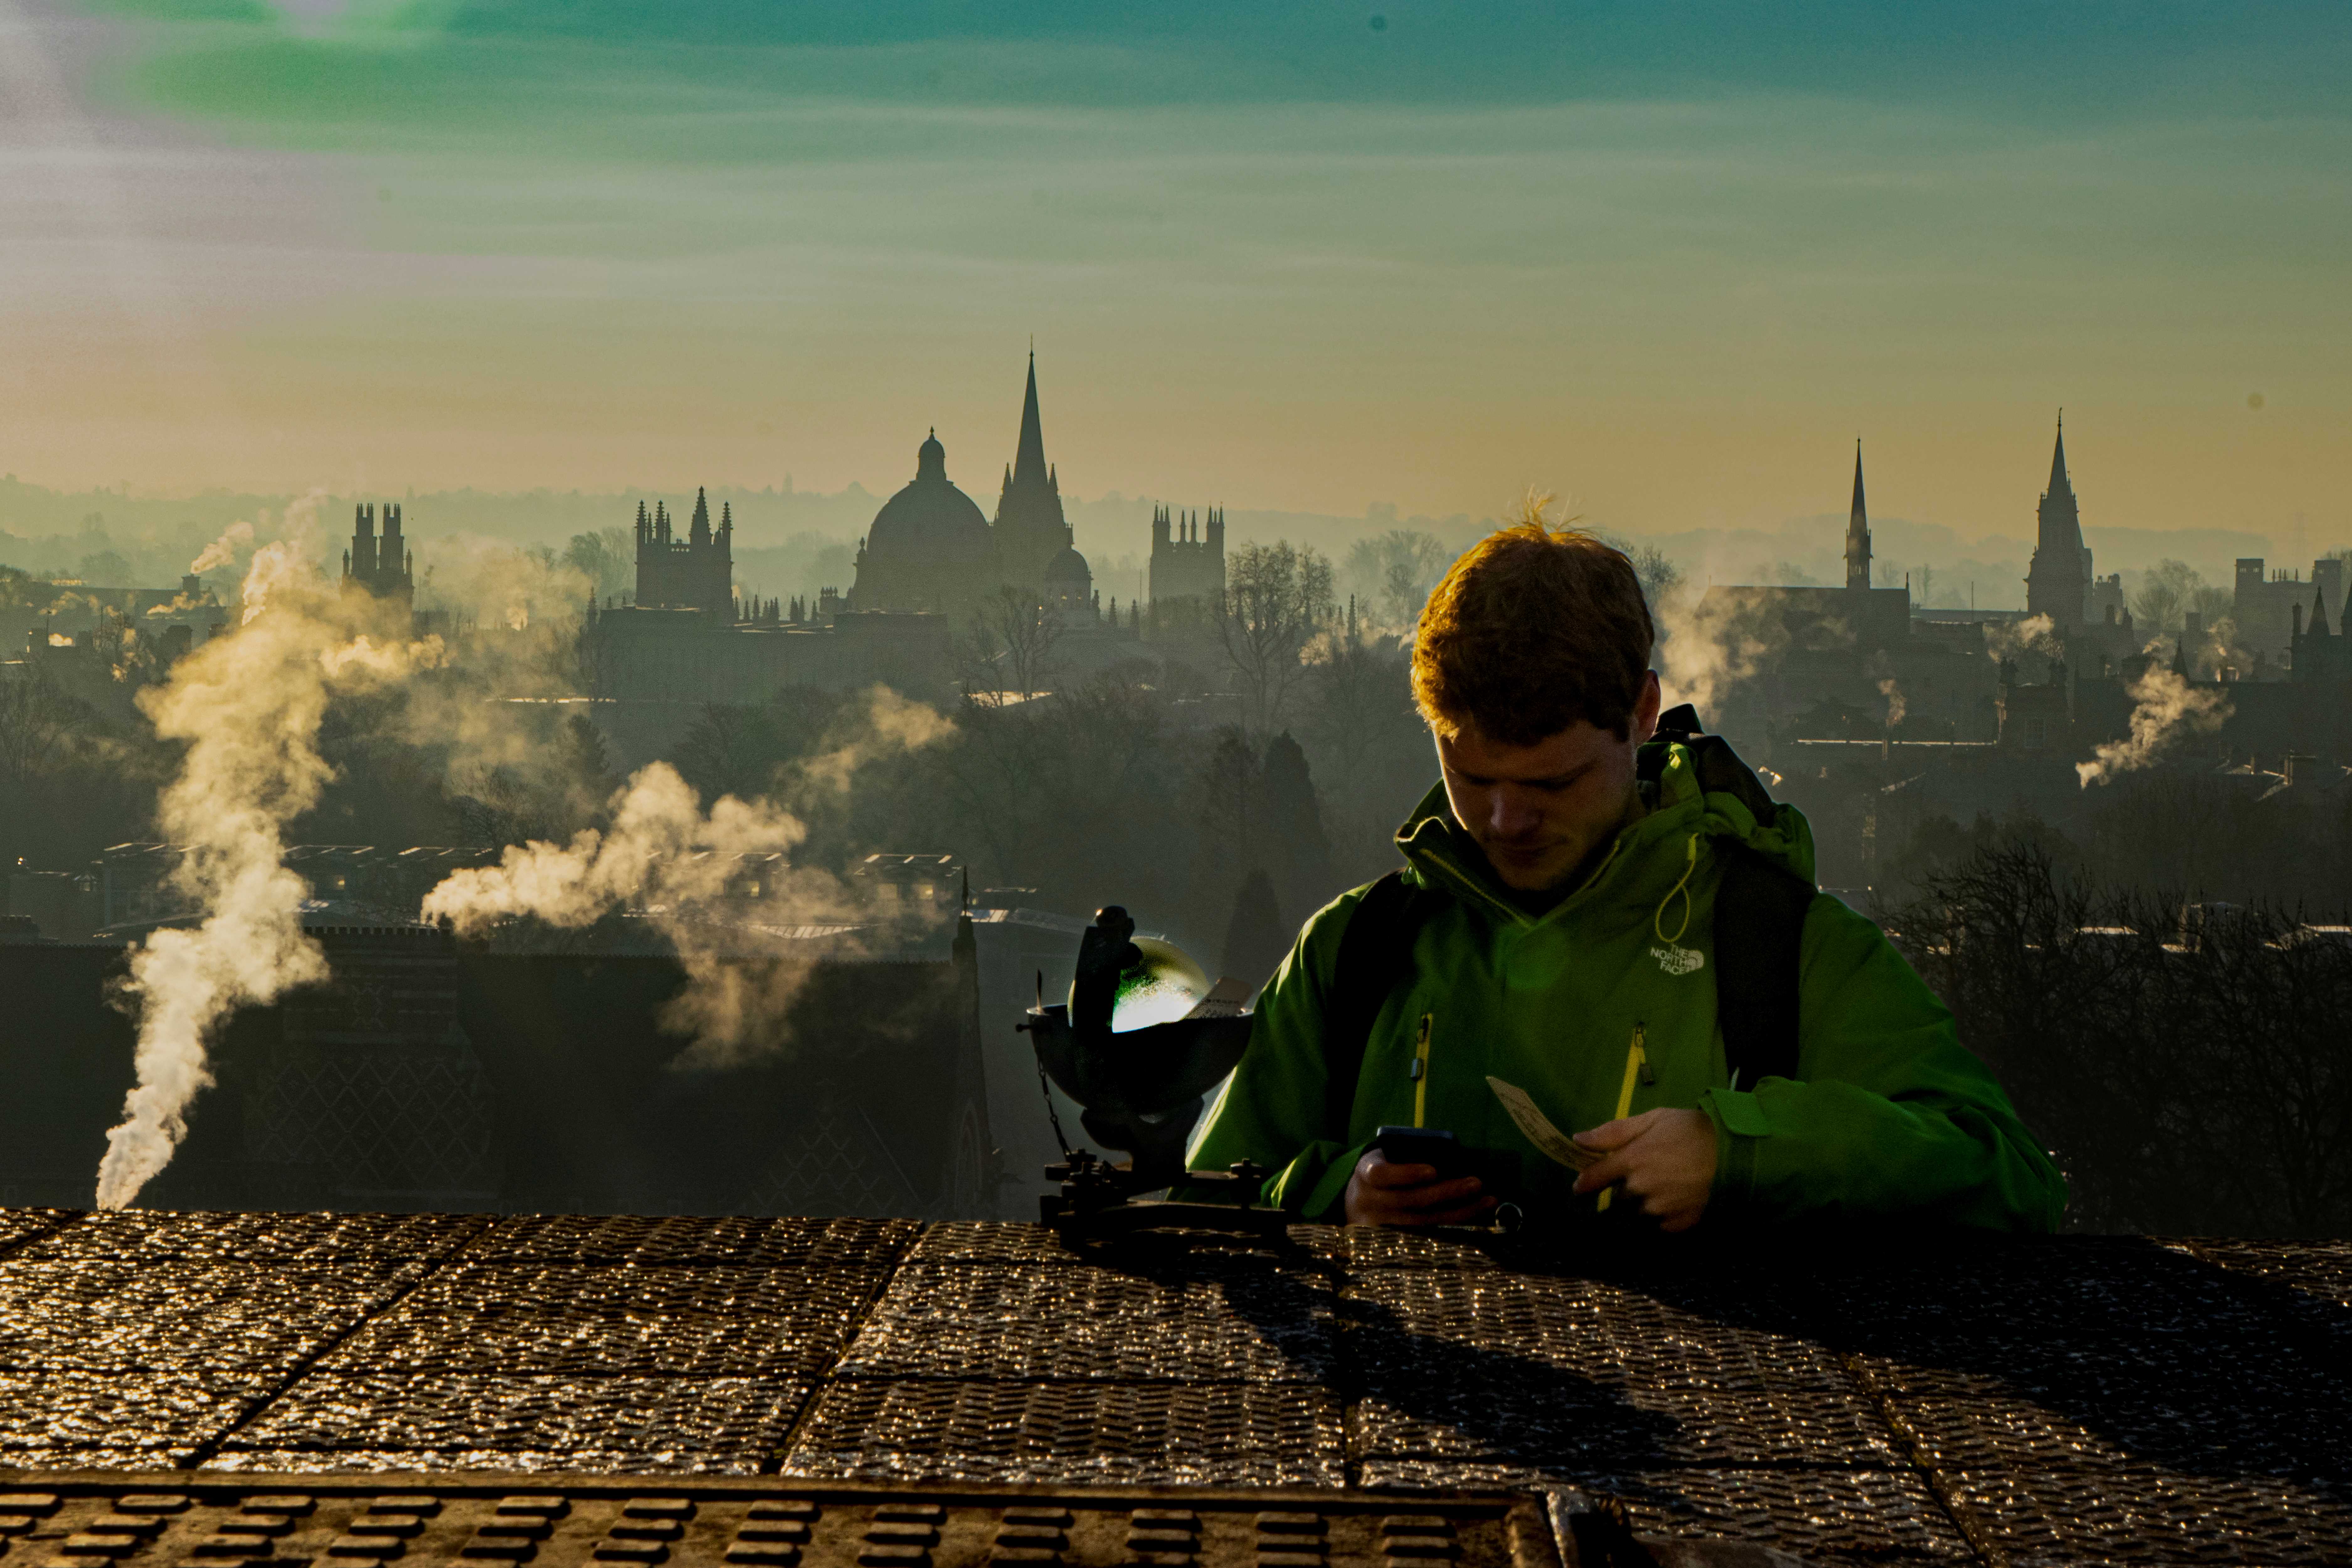 A person with measuring equipment on a roof with Oxford city in the background.